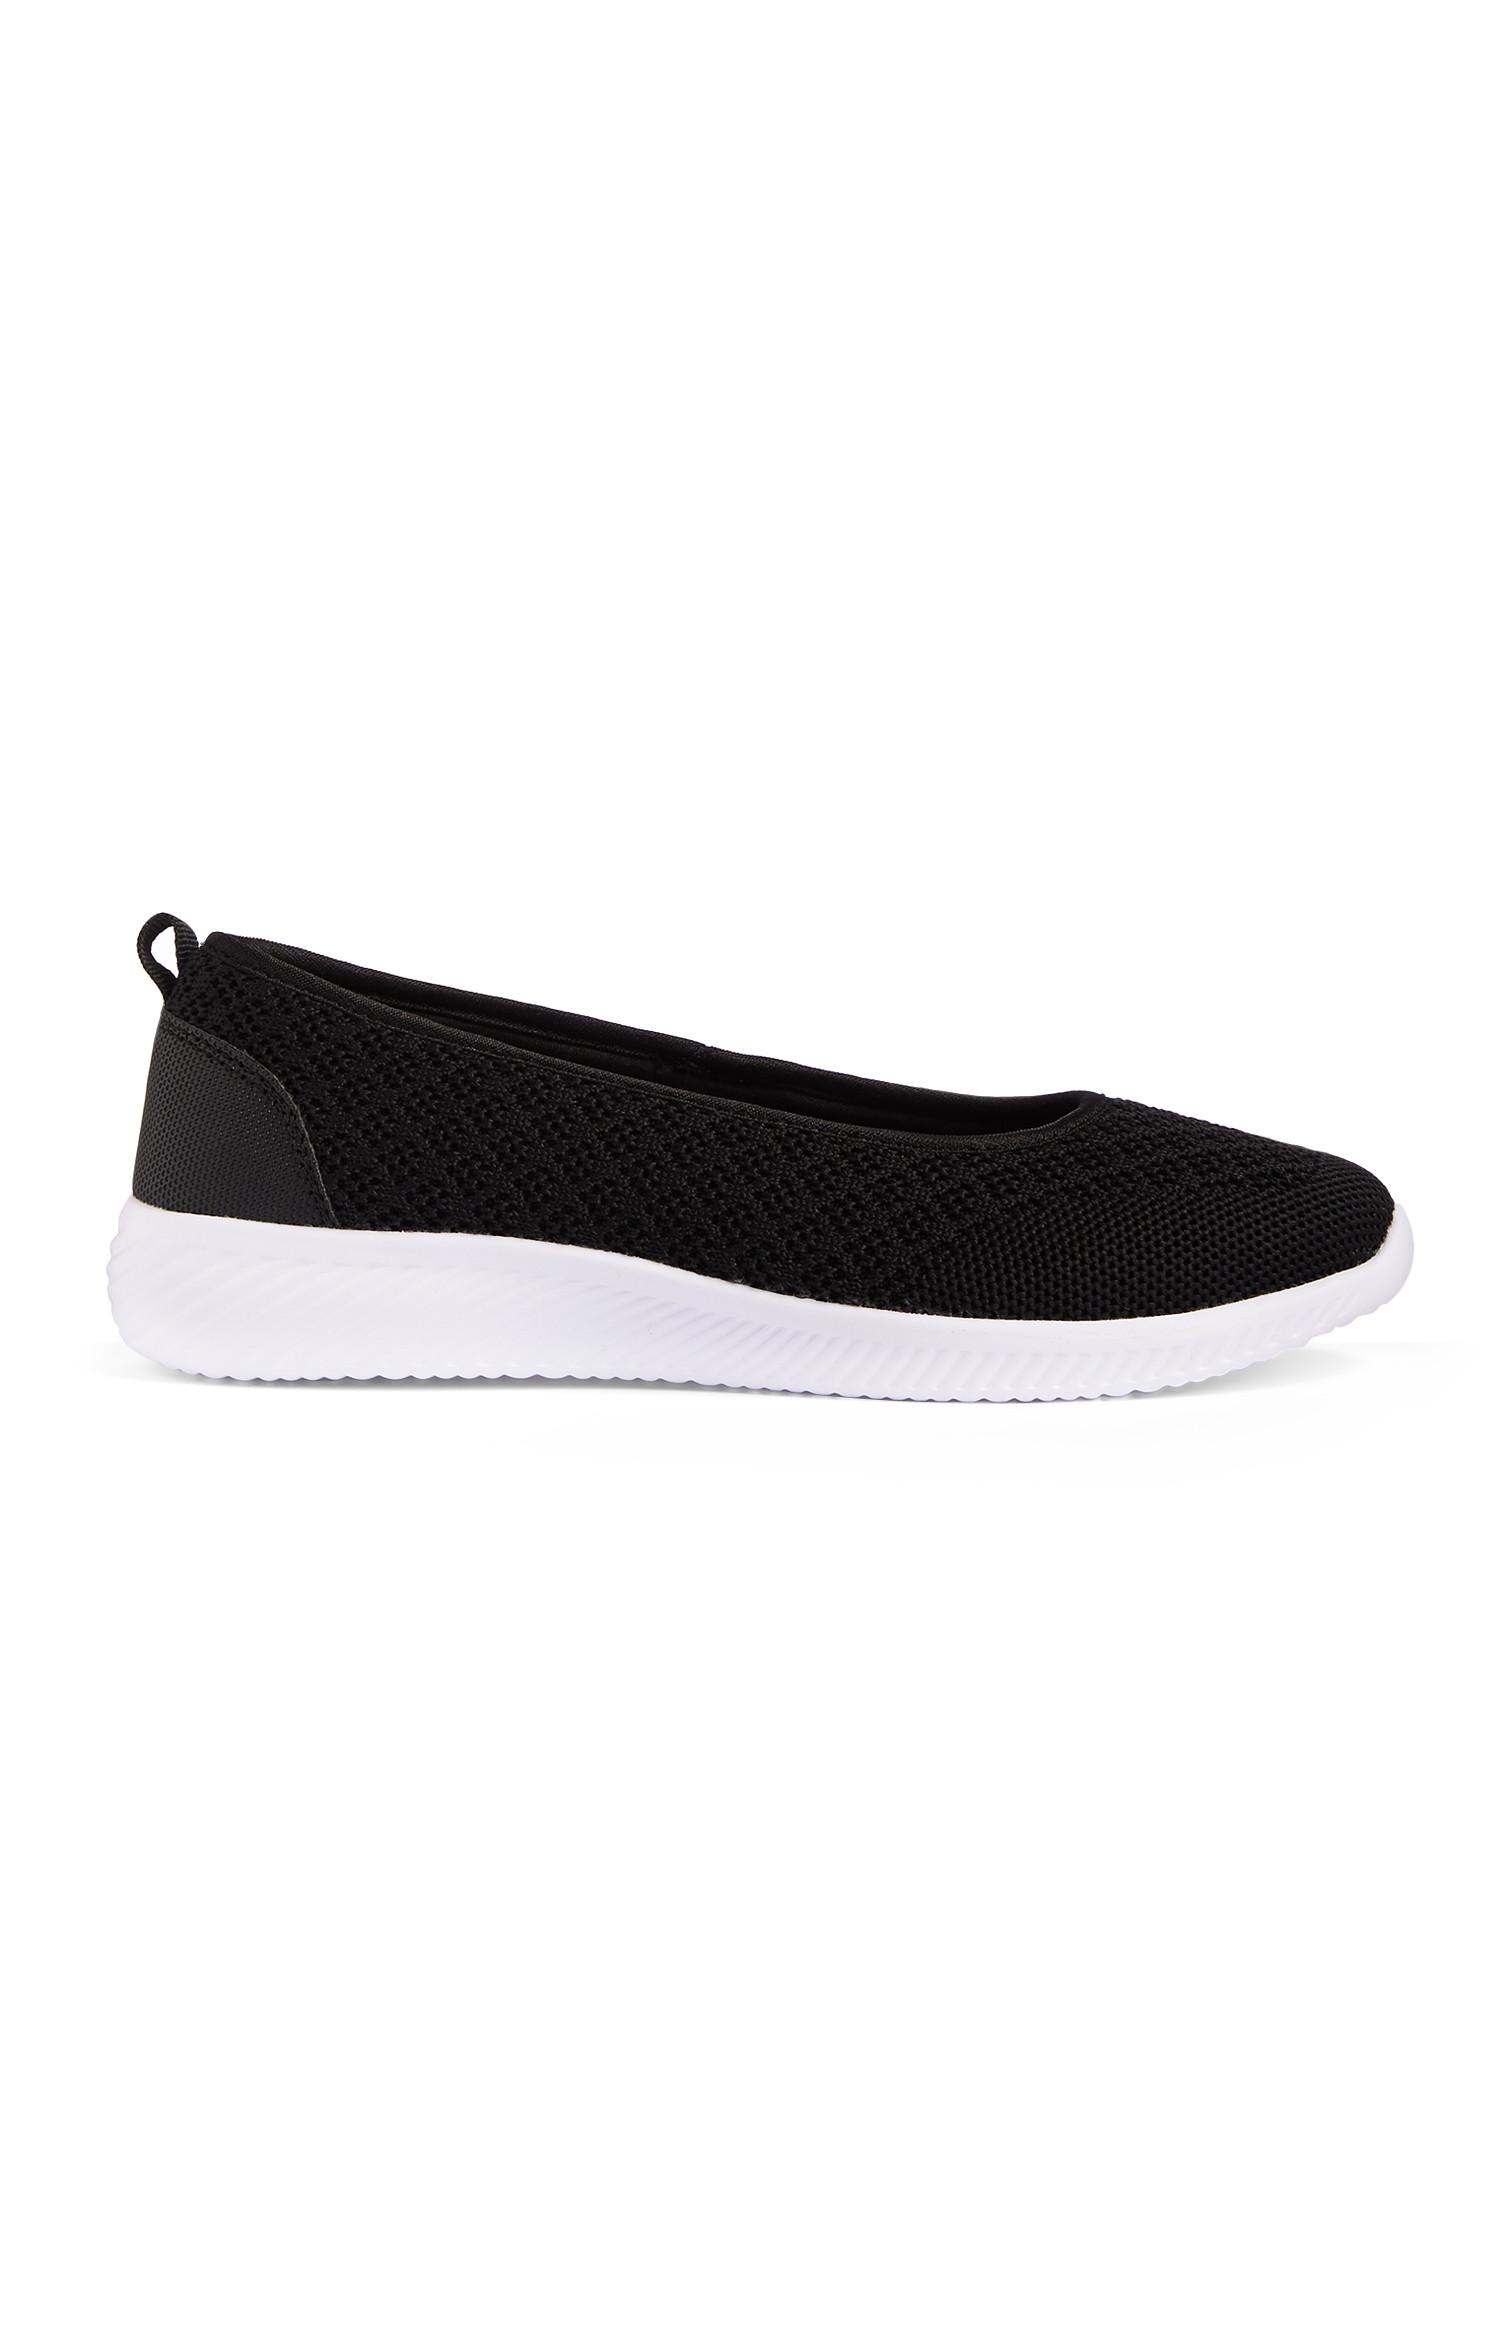 trainer slippers womens